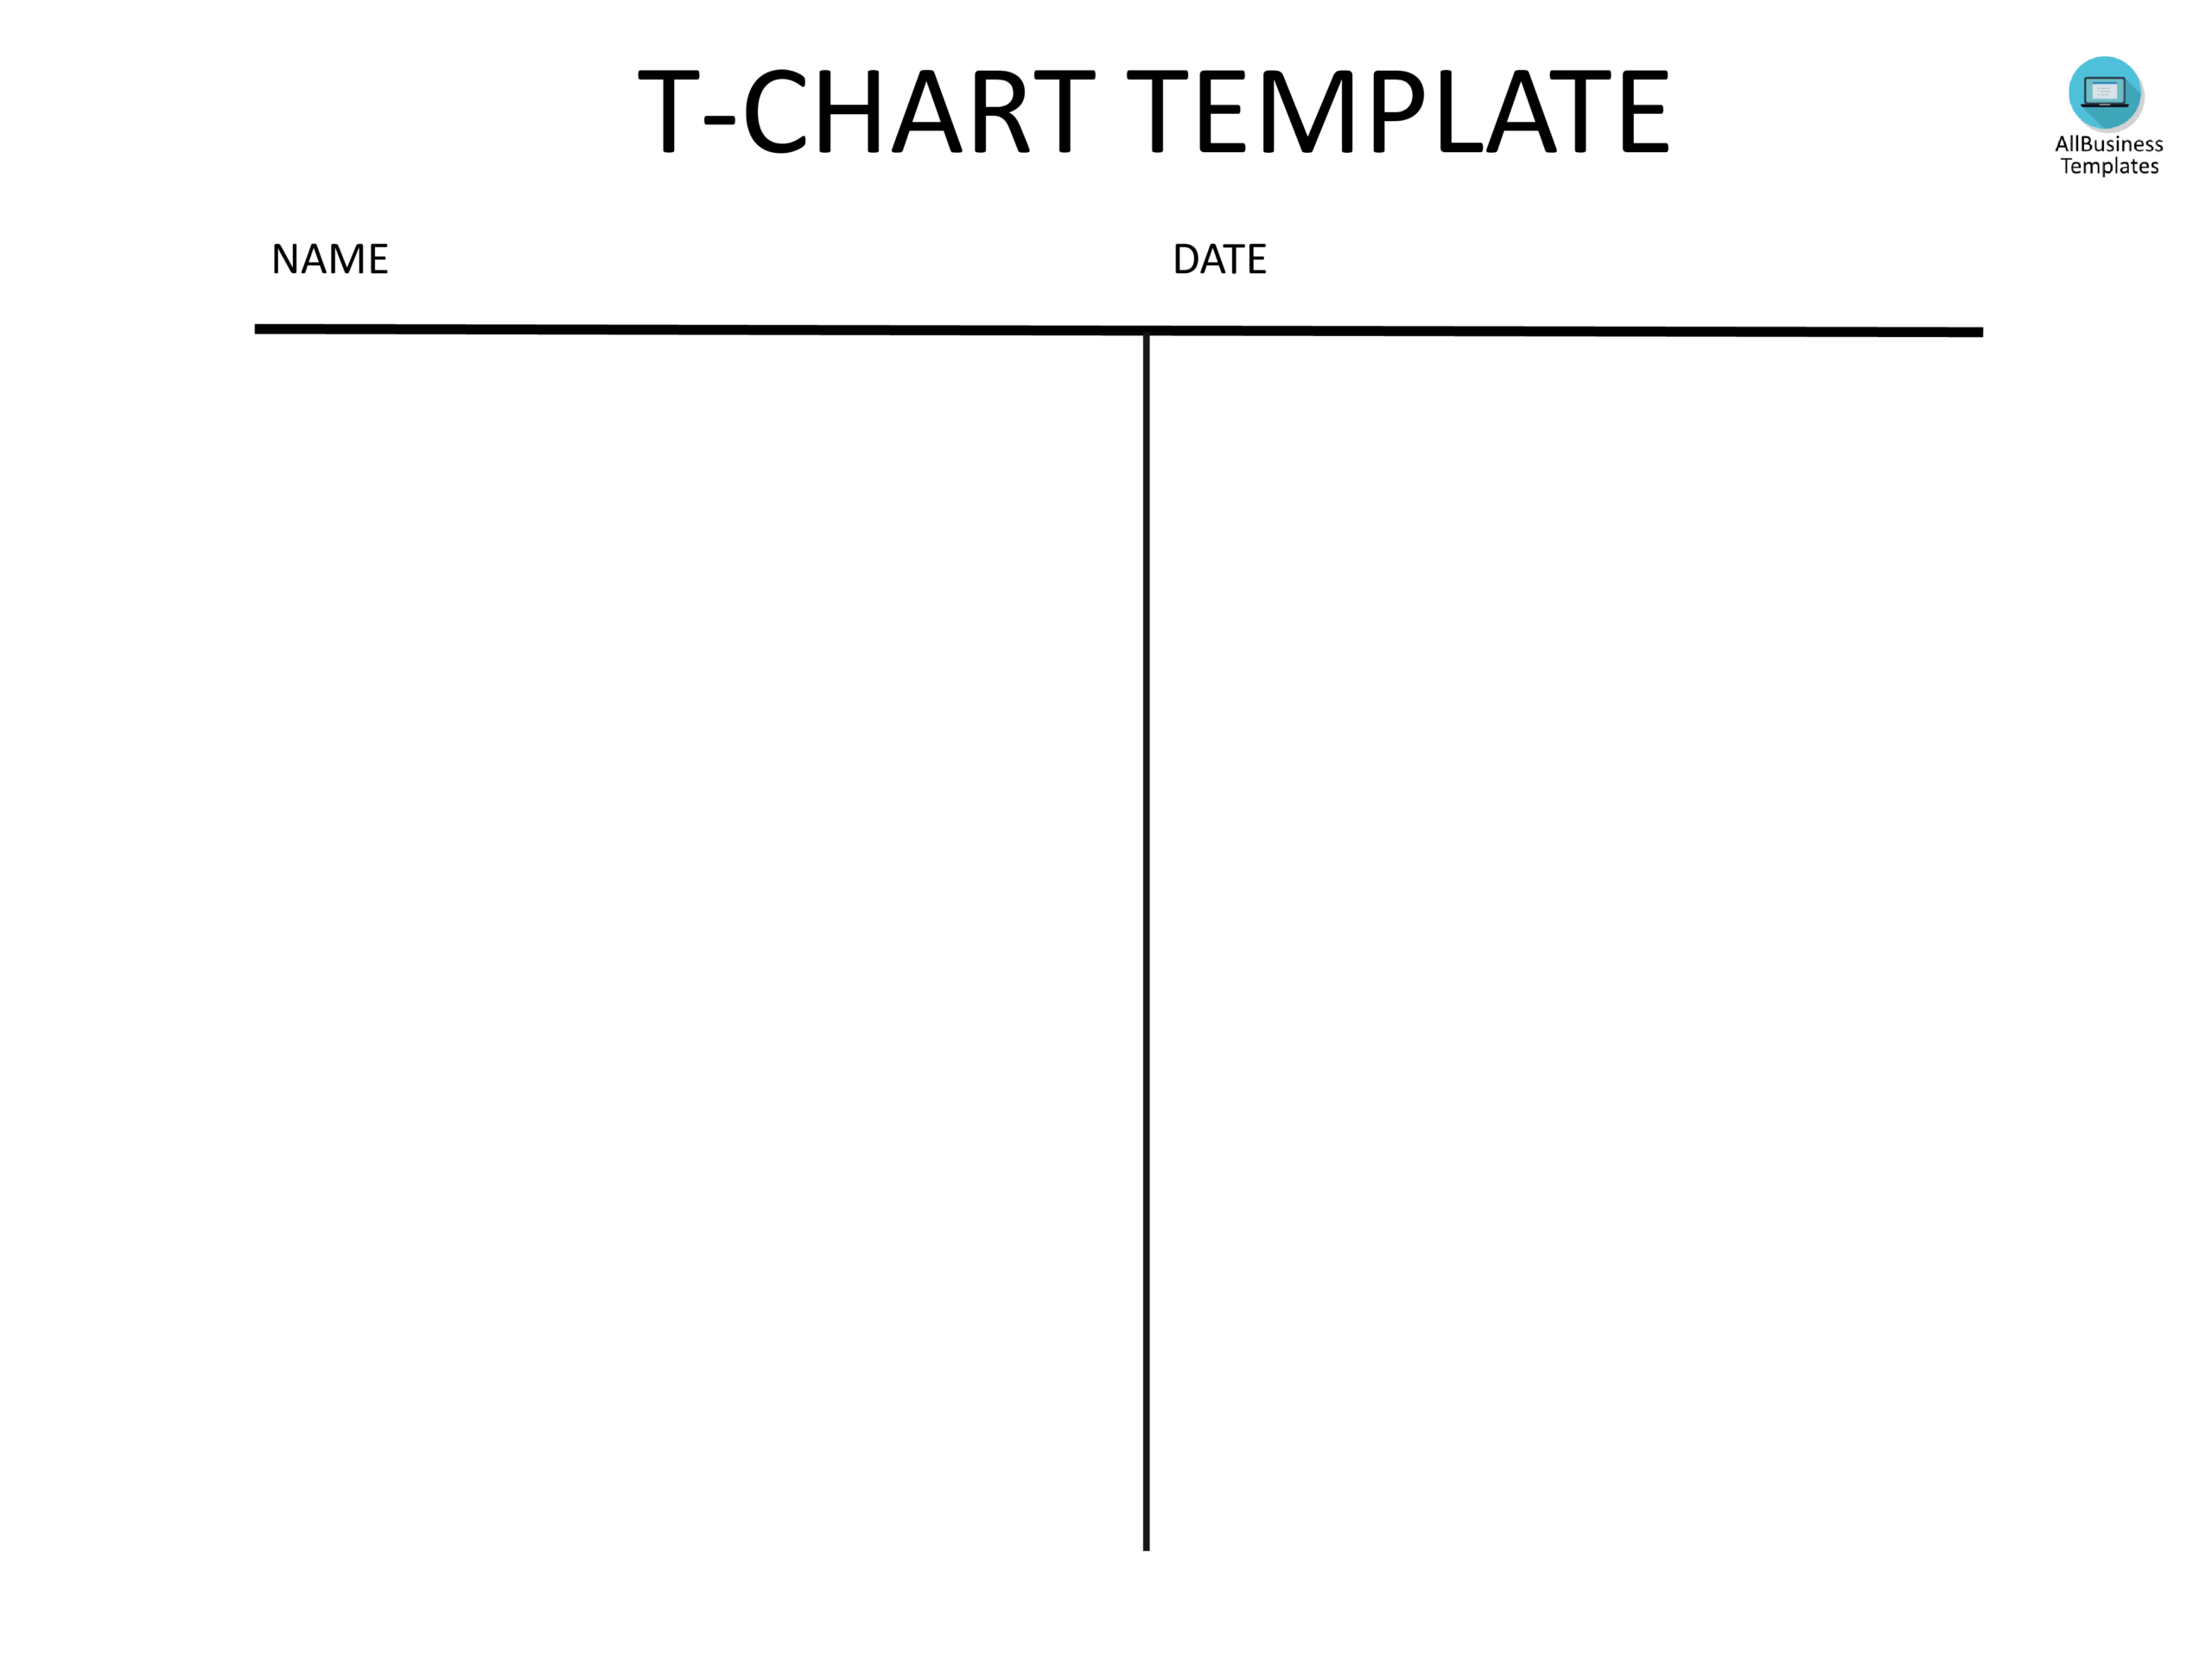 T Chart Template Pdf | Templates At Allbusinesstemplates Intended For T Chart Template For Word